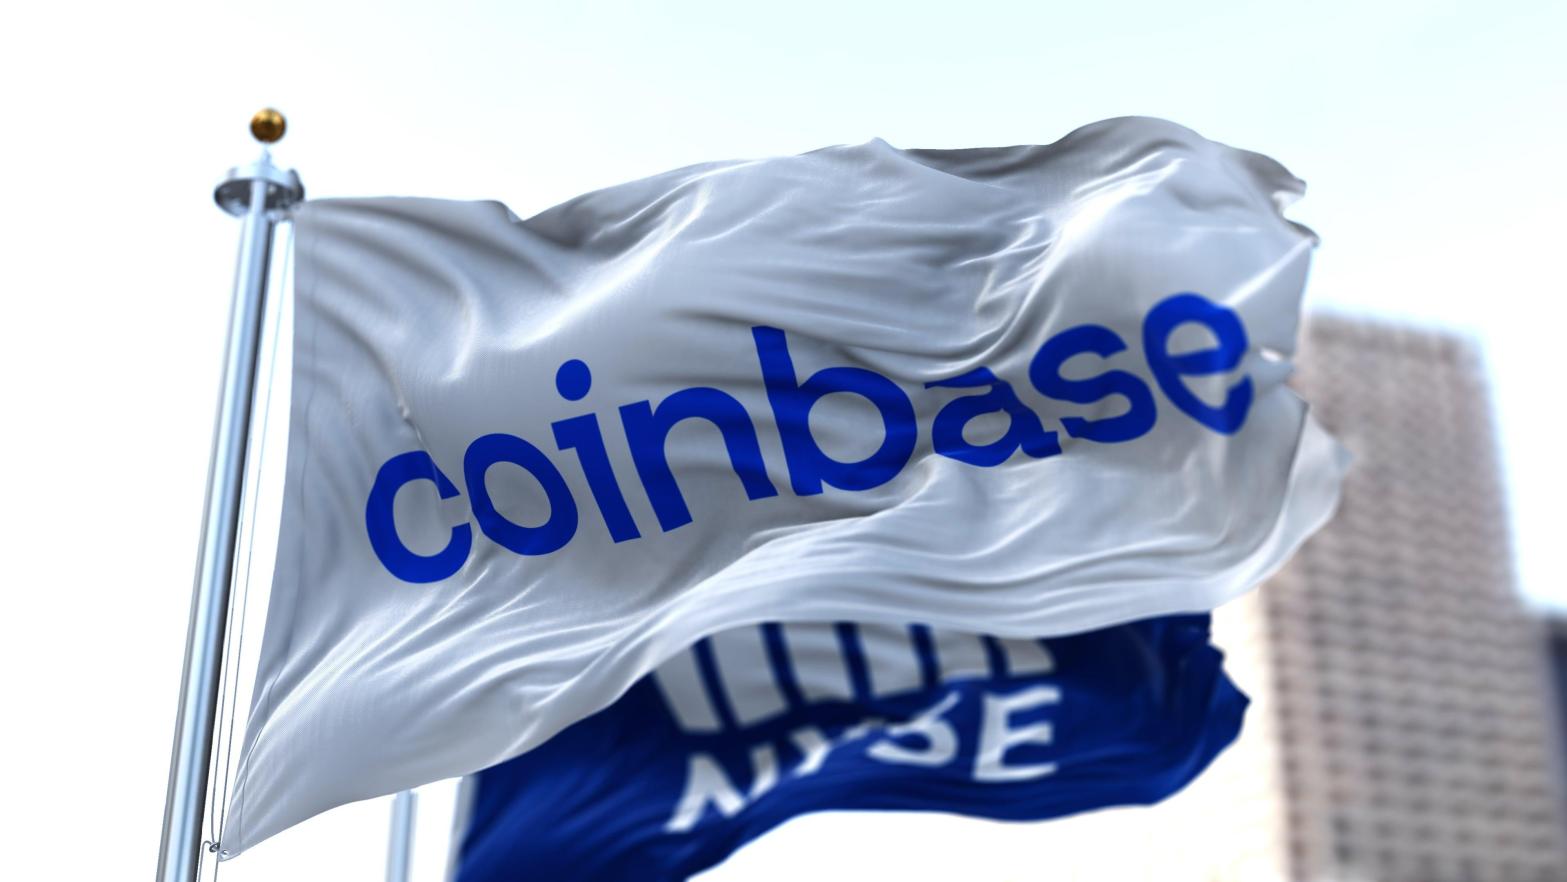 Coinbase announced its second round of layoffs in less than a year on Tuesday. (Photo: rarrarorro, Shutterstock)